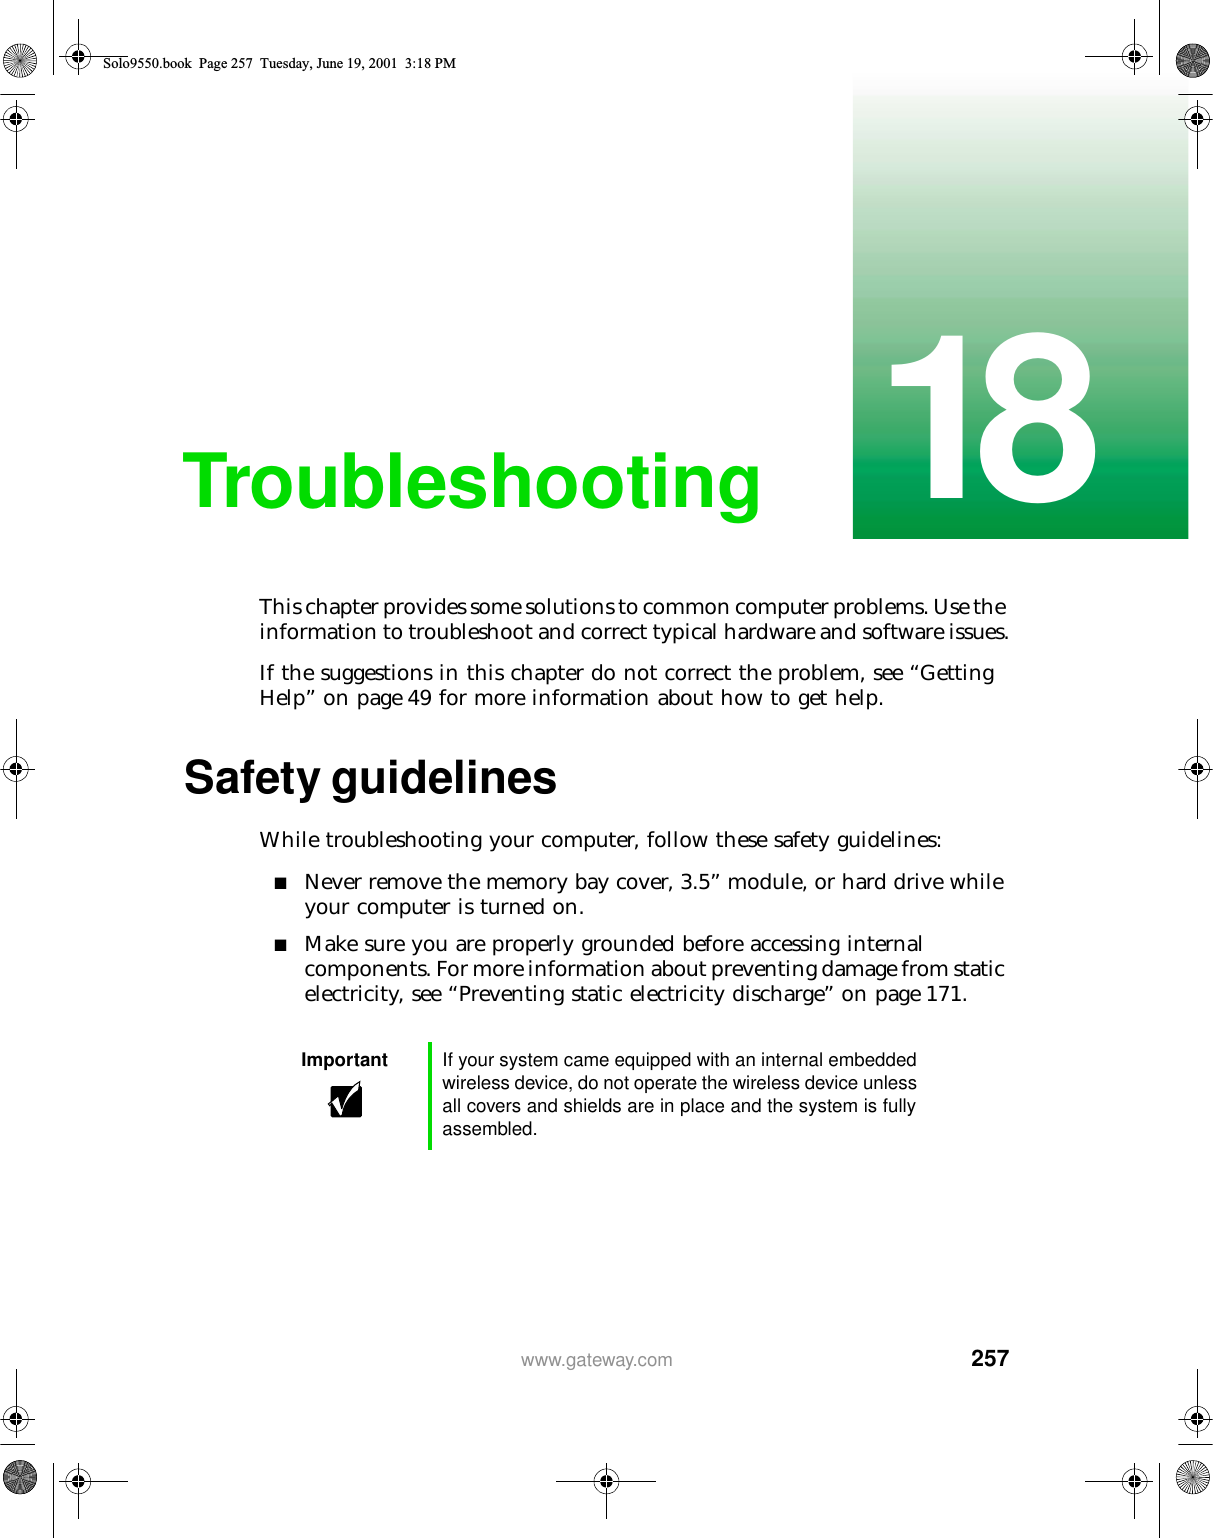 25718www.gateway.comTroubleshootingThis chapter provides some solutions to common computer problems. Use the information to troubleshoot and correct typical hardware and software issues.If the suggestions in this chapter do not correct the problem, see “Getting Help” on page 49 for more information about how to get help.Safety guidelinesWhile troubleshooting your computer, follow these safety guidelines:■Never remove the memory bay cover, 3.5” module, or hard drive while your computer is turned on.■Make sure you are properly grounded before accessing internal components. For more information about preventing damage from static electricity, see “Preventing static electricity discharge” on page 171.Important If your system came equipped with an internal embedded wireless device, do not operate the wireless device unless all covers and shields are in place and the system is fully assembled.Solo9550.book Page 257 Tuesday, June 19, 2001 3:18 PM